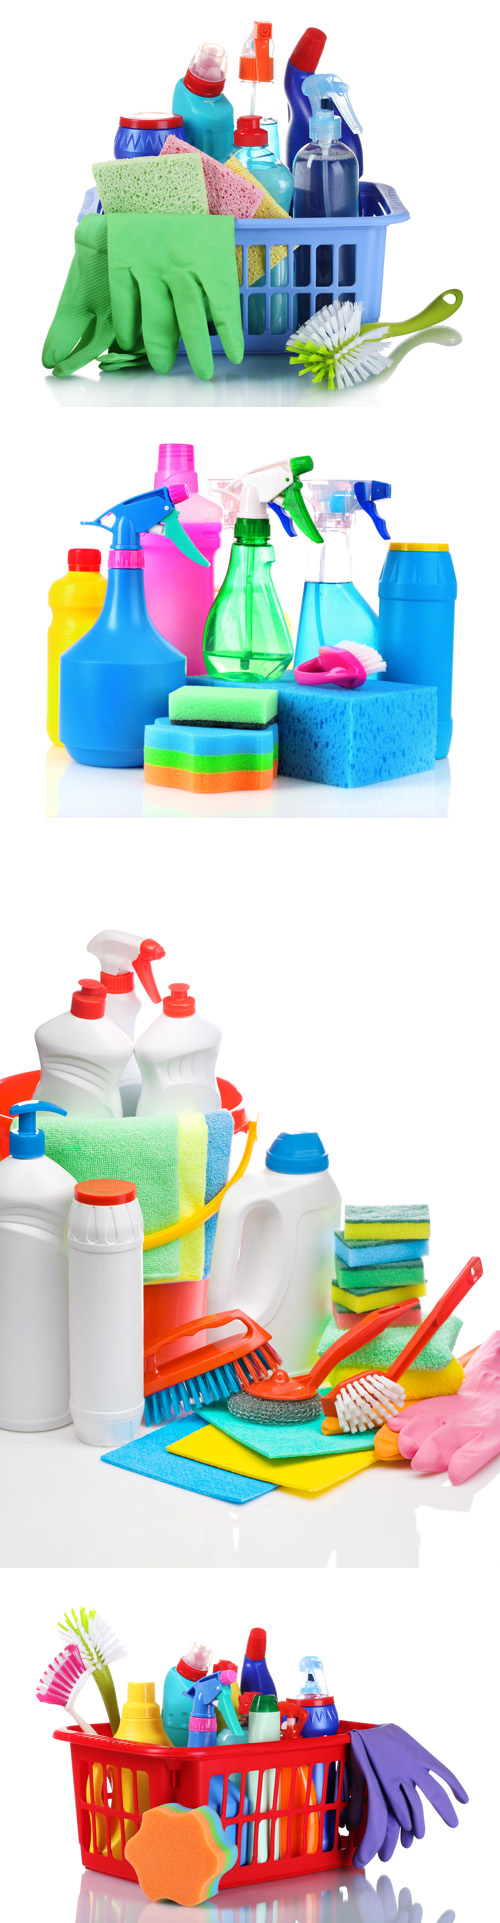 Stock Photos - Cleaning Supplies